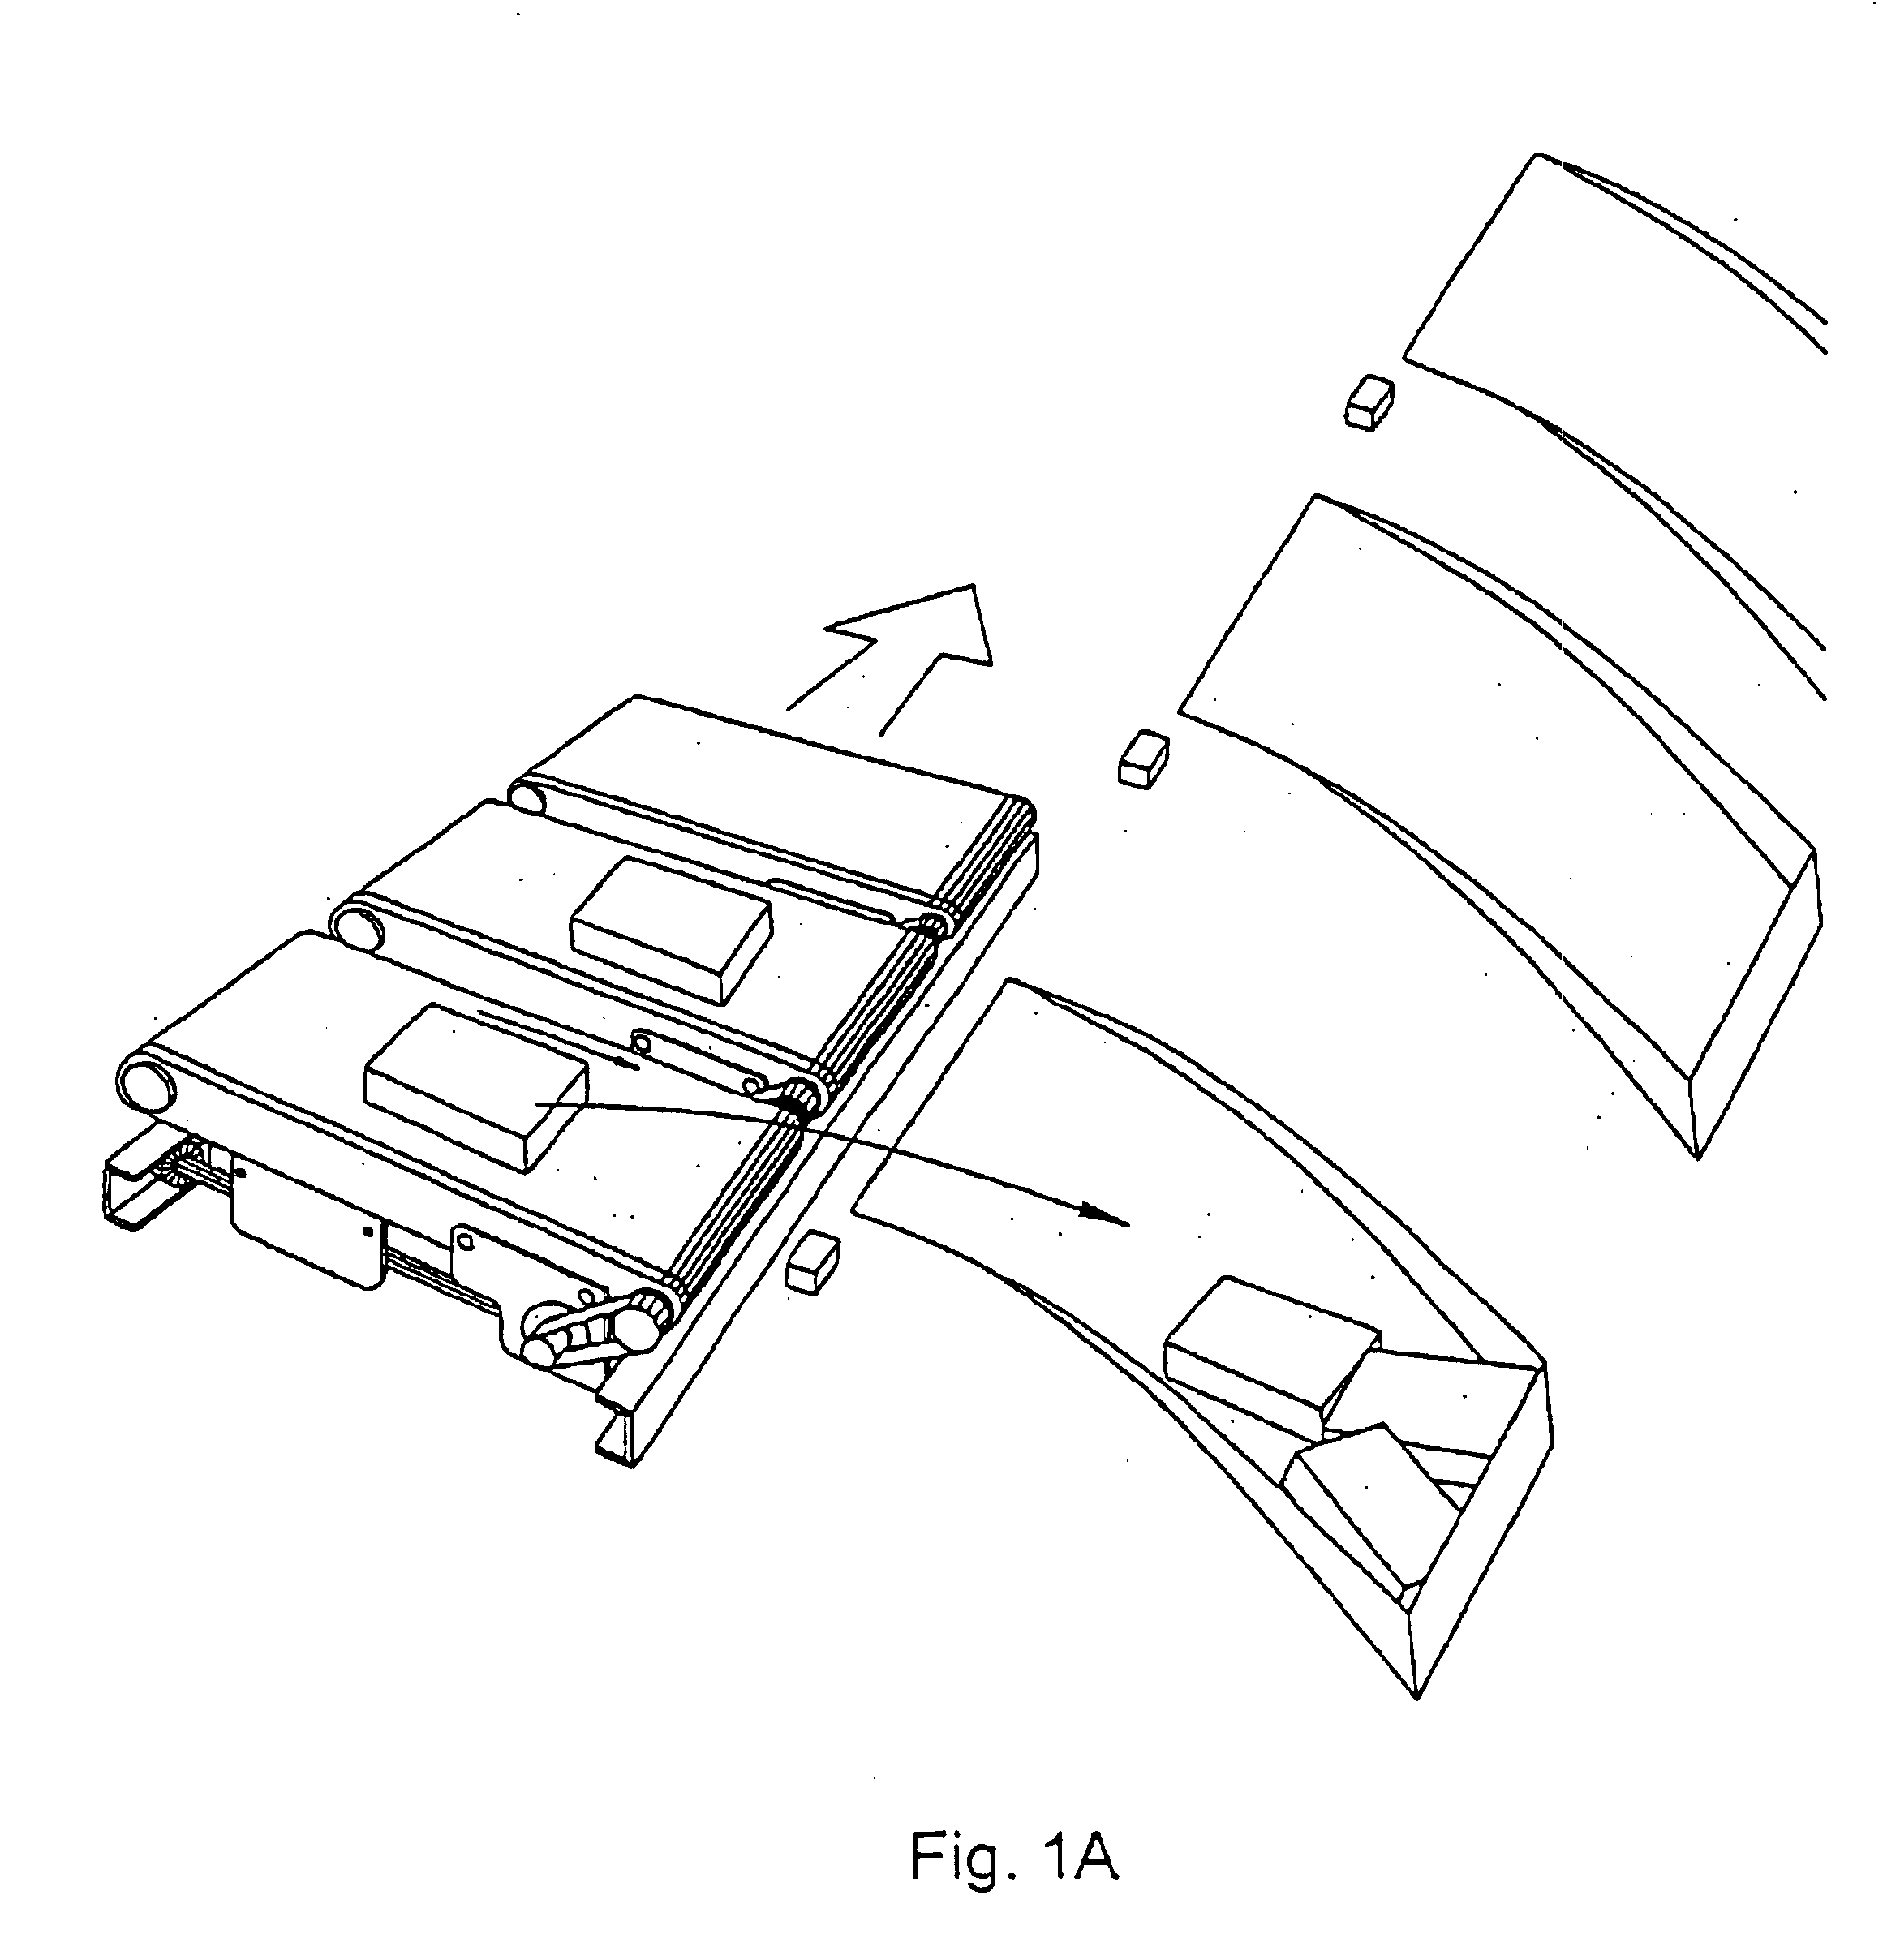 Sorting system for transferring items from a trolley to an unloading station in response to the detection of a magnetic field generated at the unloading station